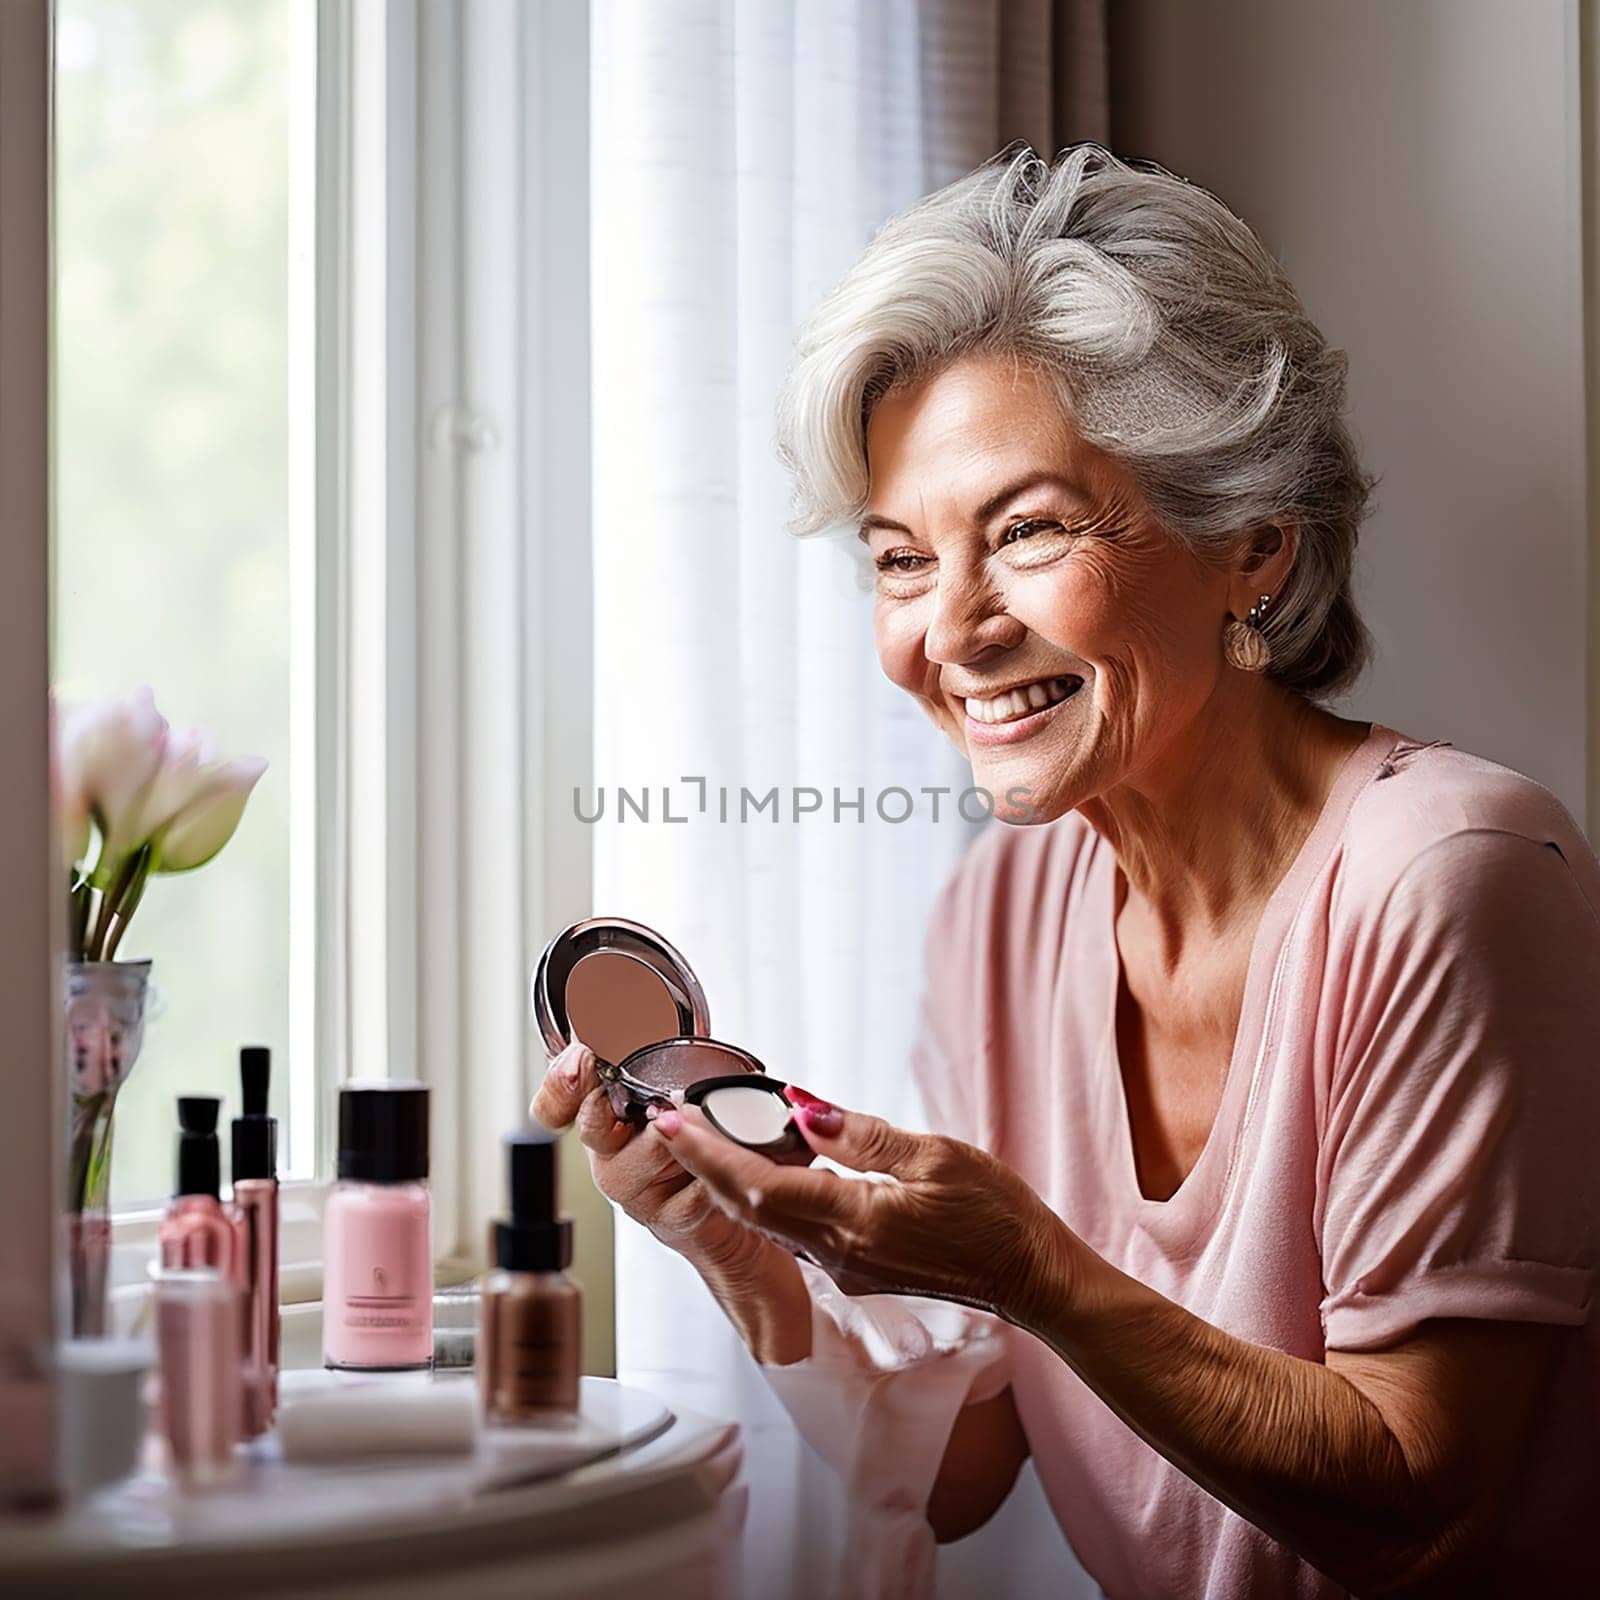 Graceful Transformation: Senior Woman's Close-Up in Front of the Bathroom Mirror by Petrichor